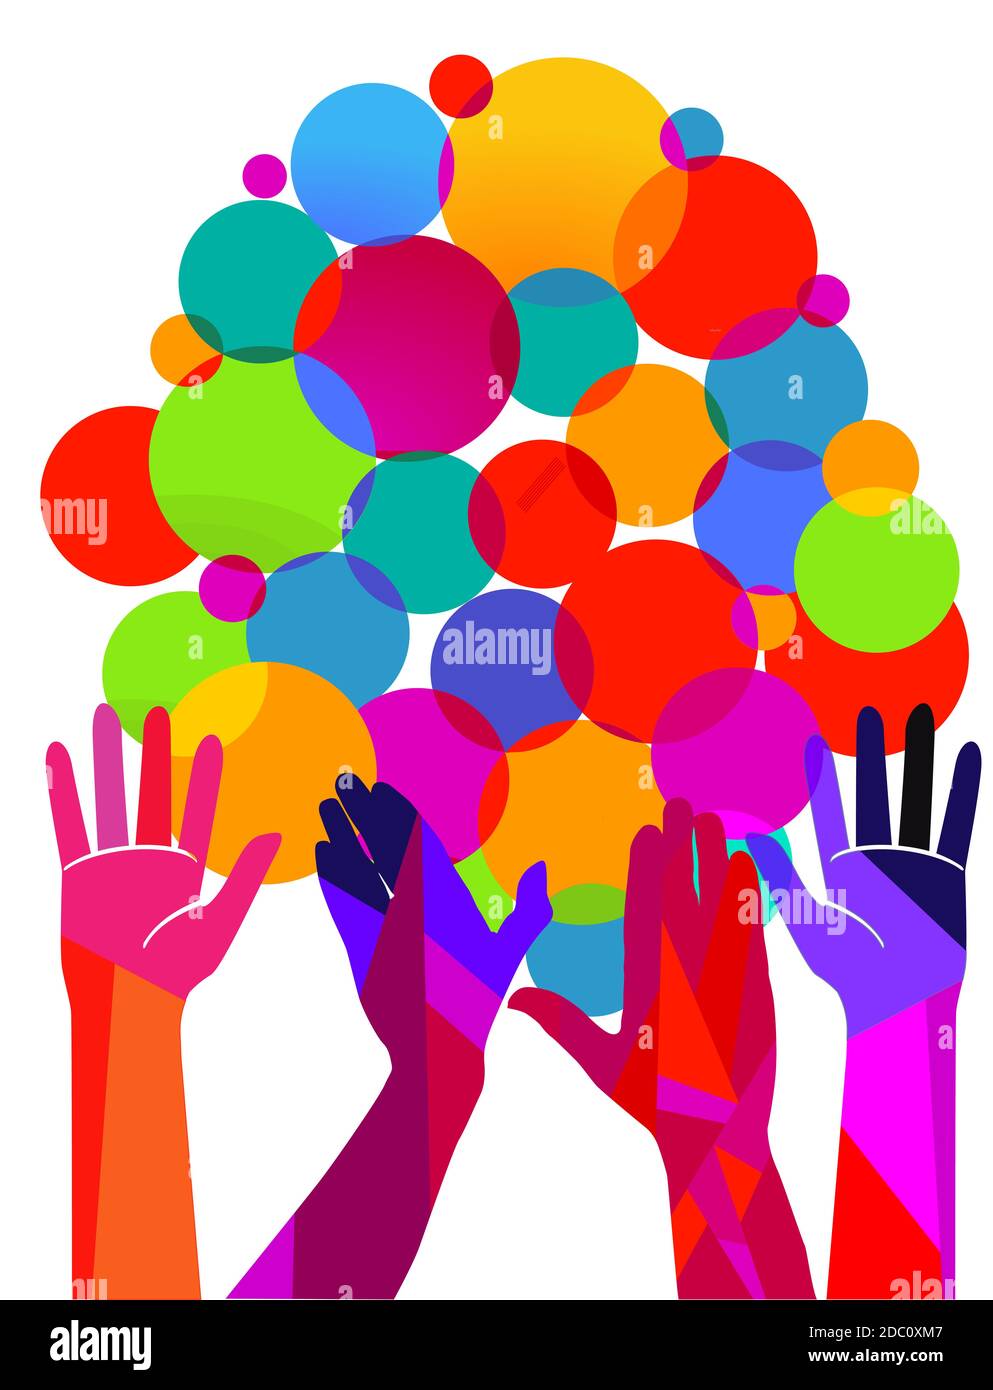 Hands happily hold colorful dots Stock Photo